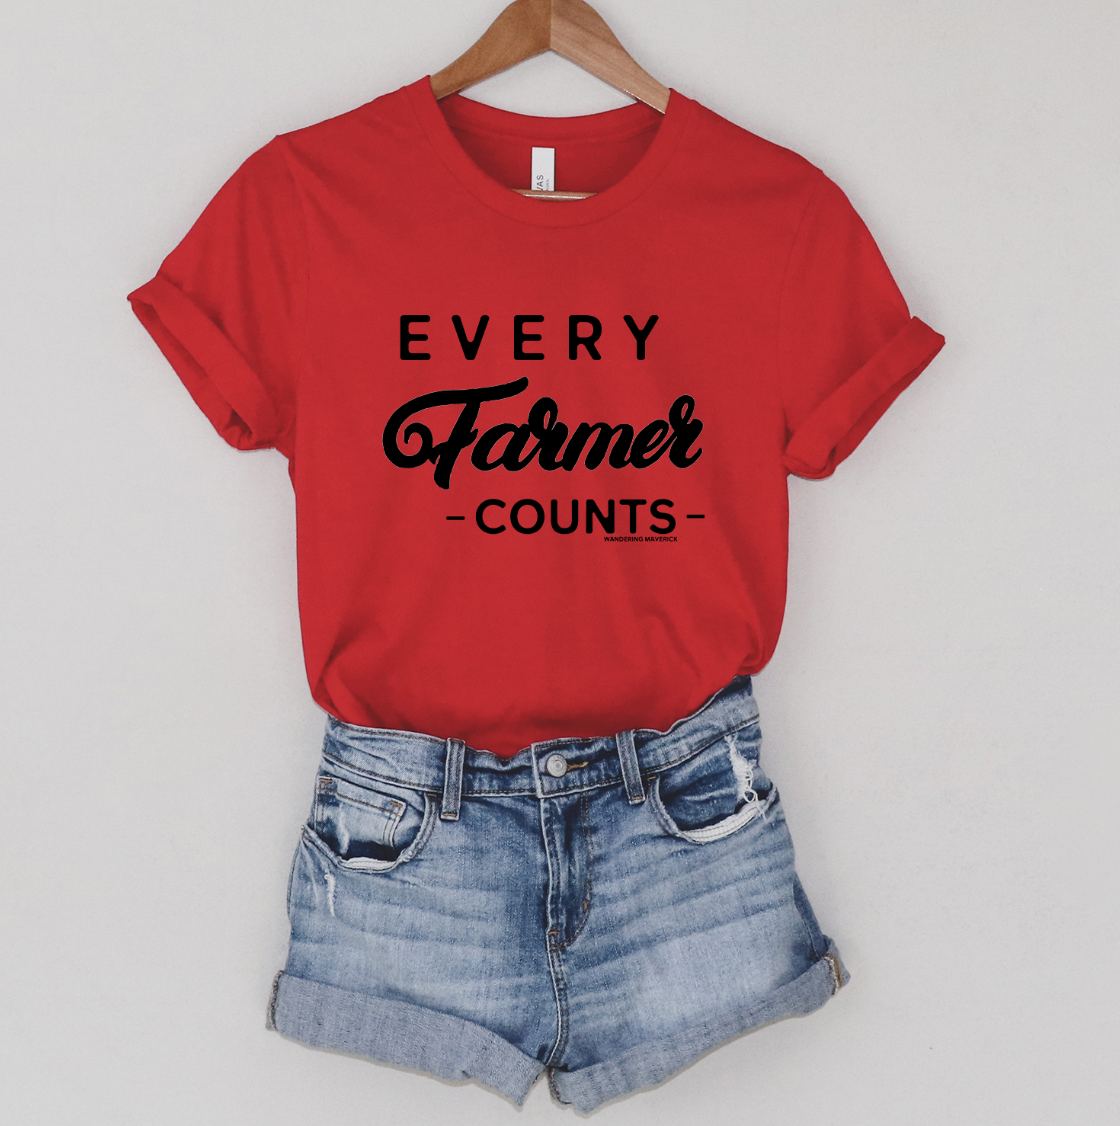 Every Farmer Counts T-Shirt (XS-4XL) - Multiple Colors!